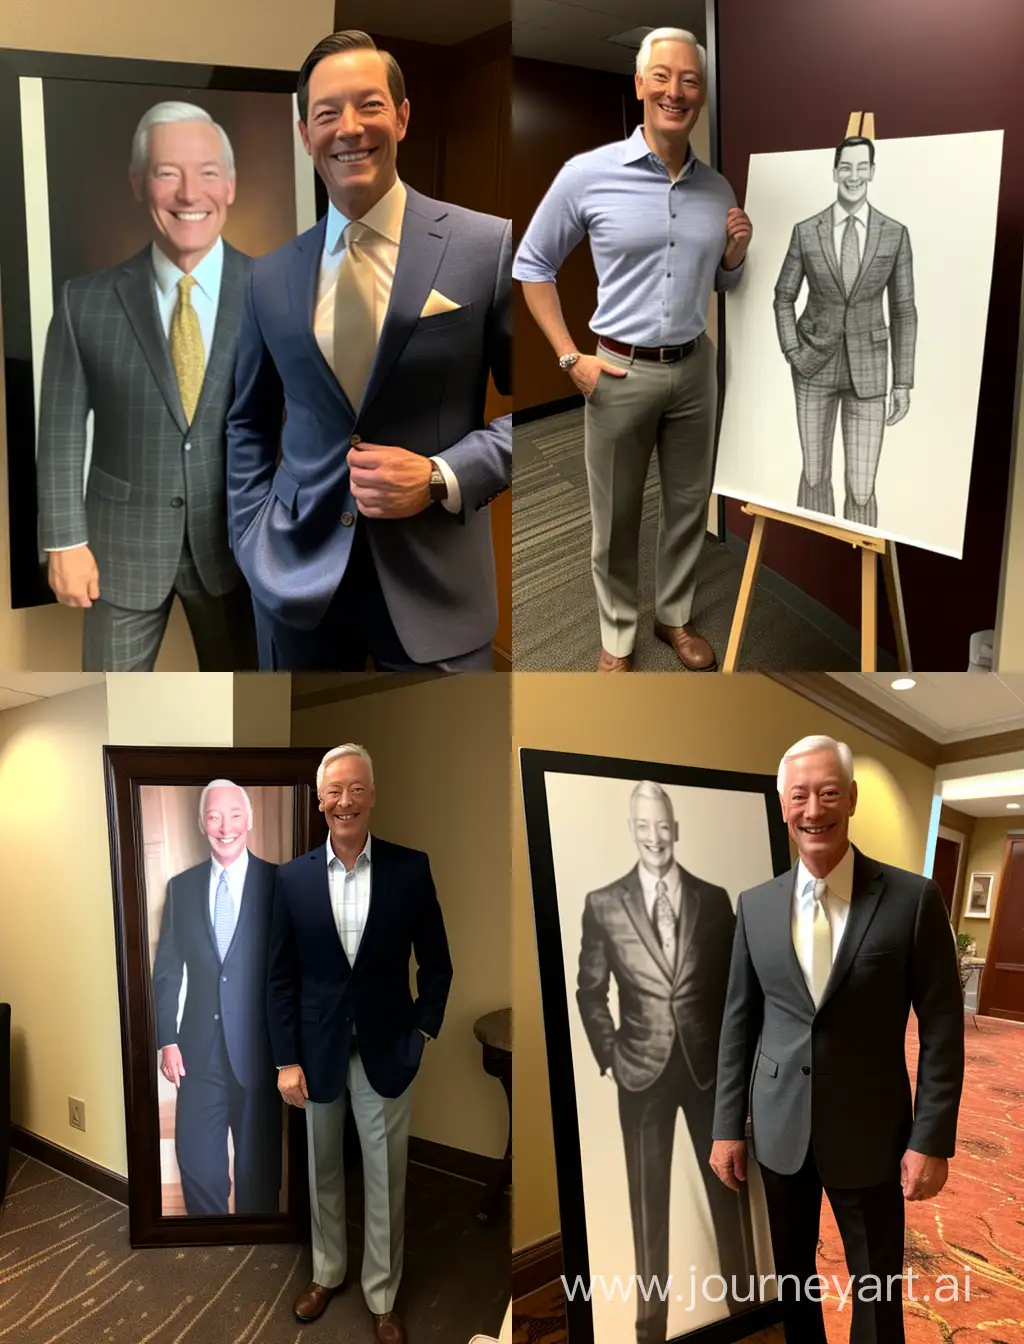 Brian Tracy smiling next to another man
front view
full body